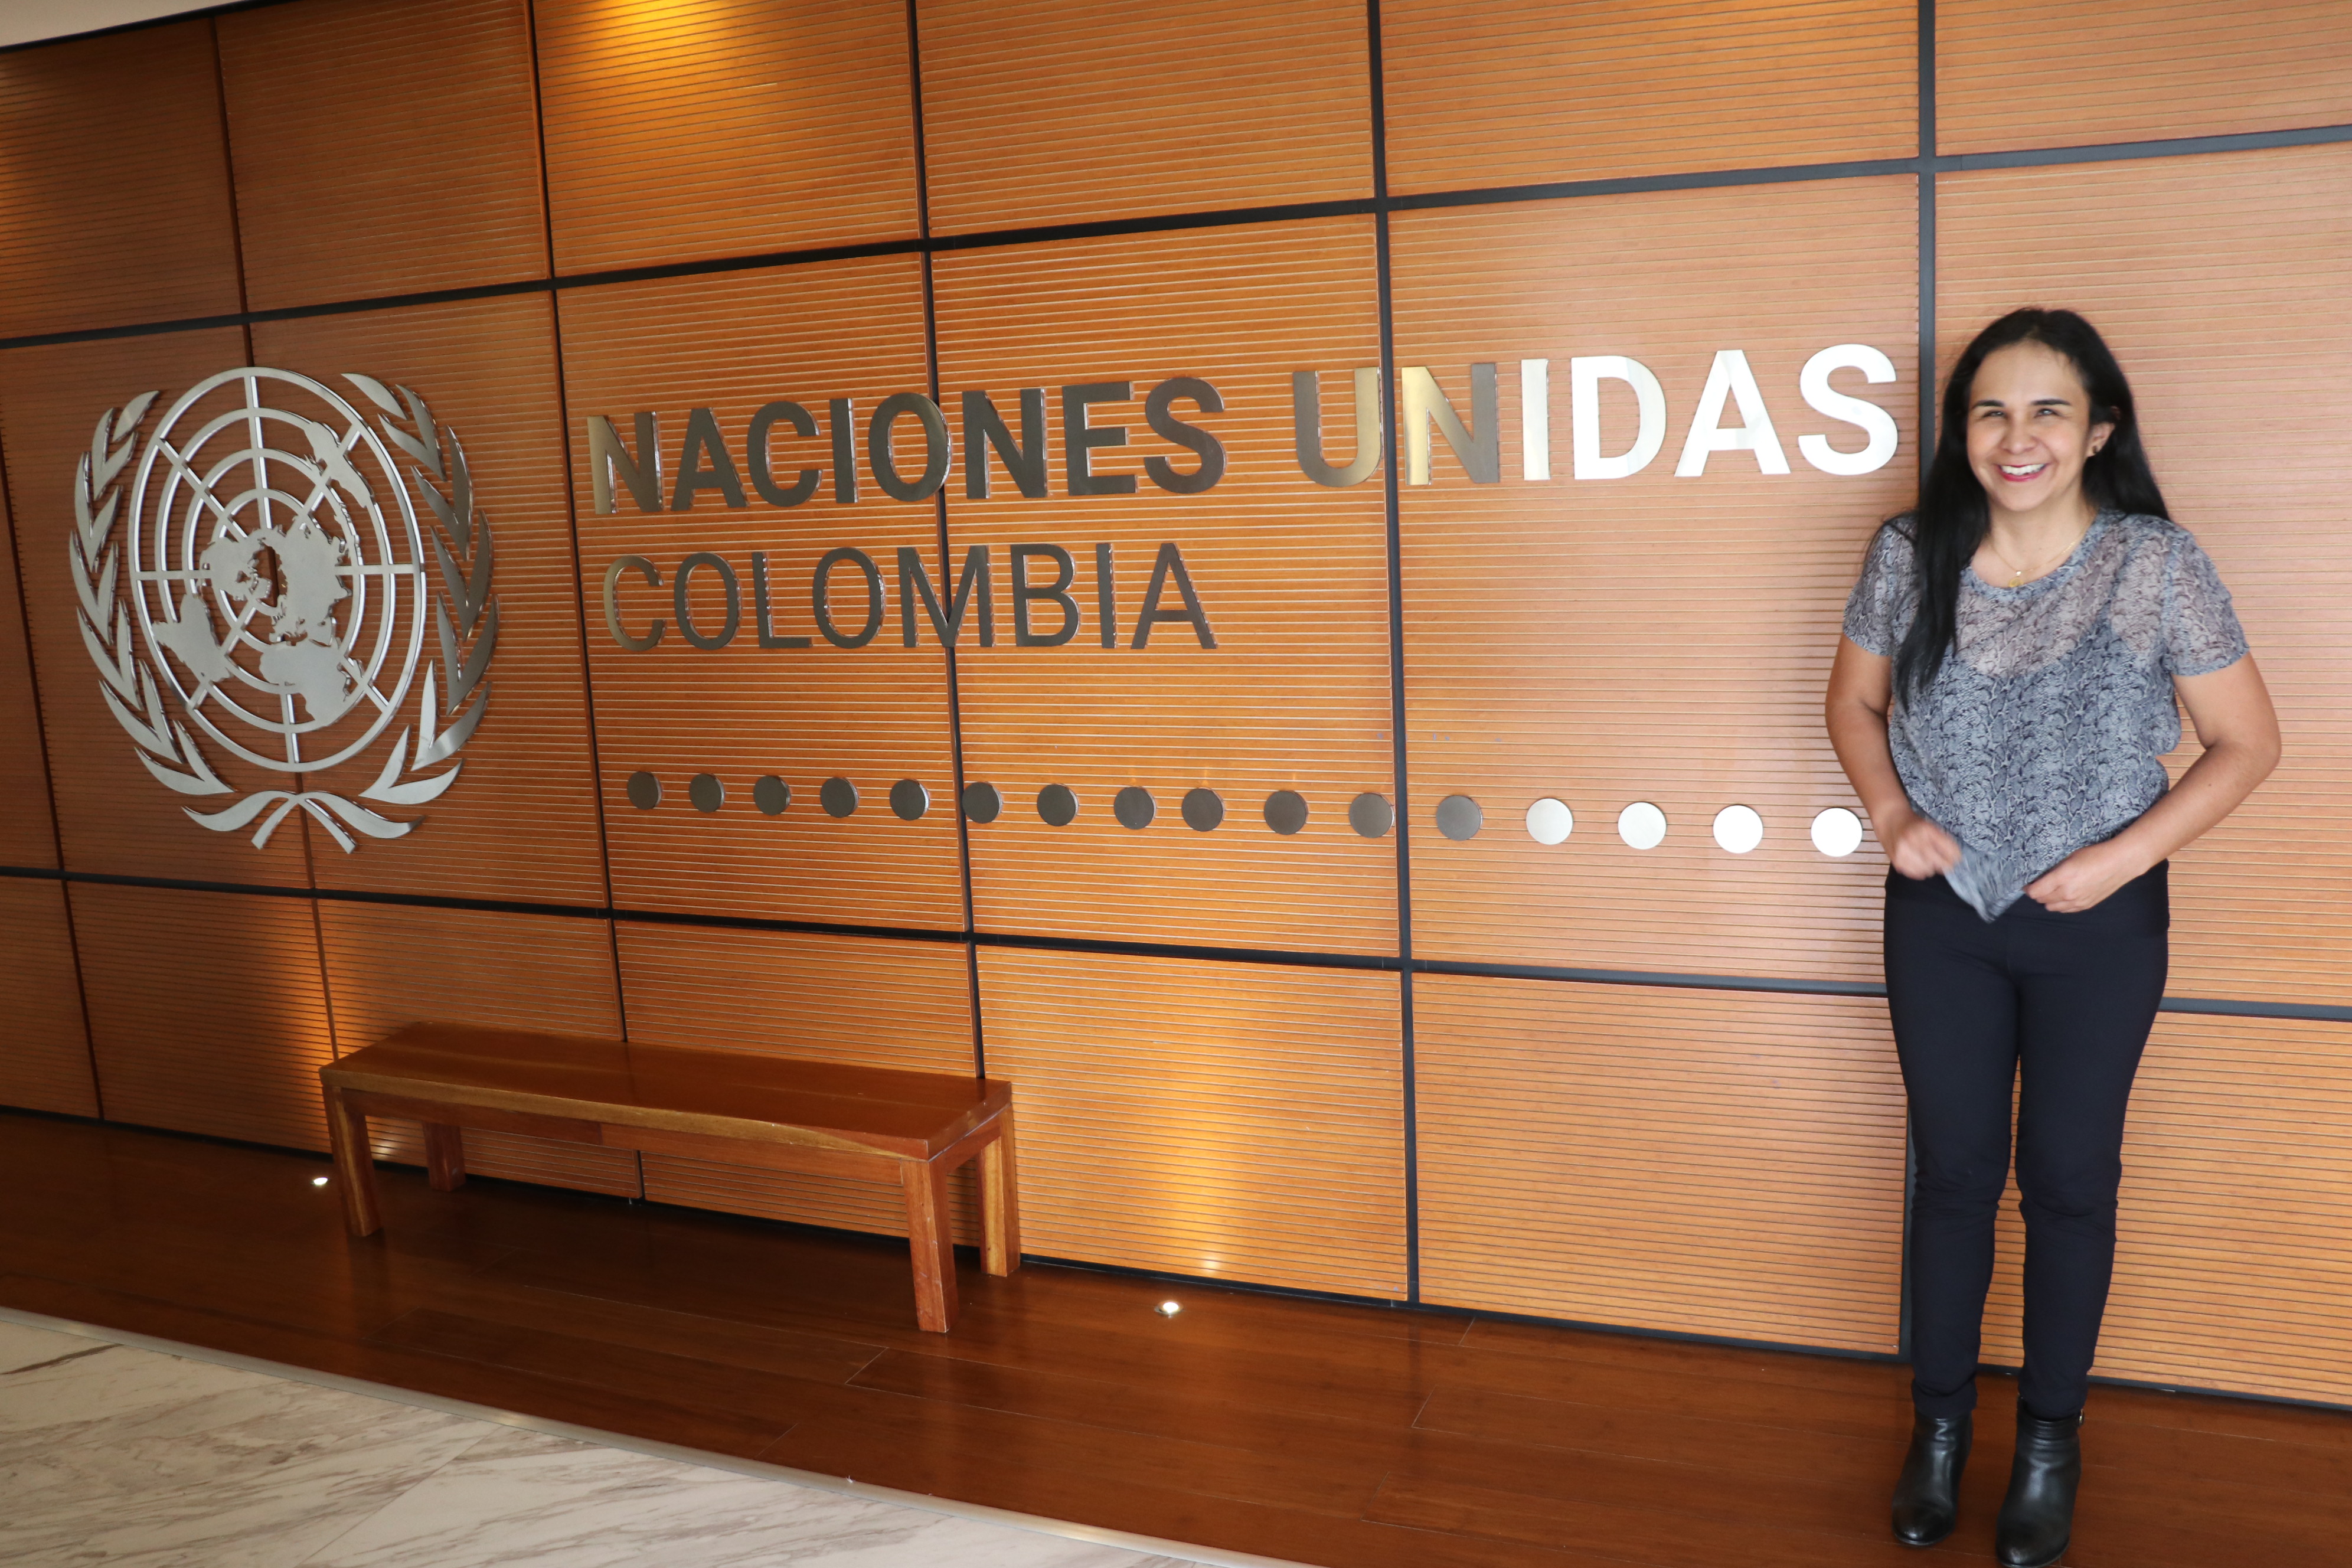 Adriana stands next to a sign that reads "Naciones unidas Colombia"